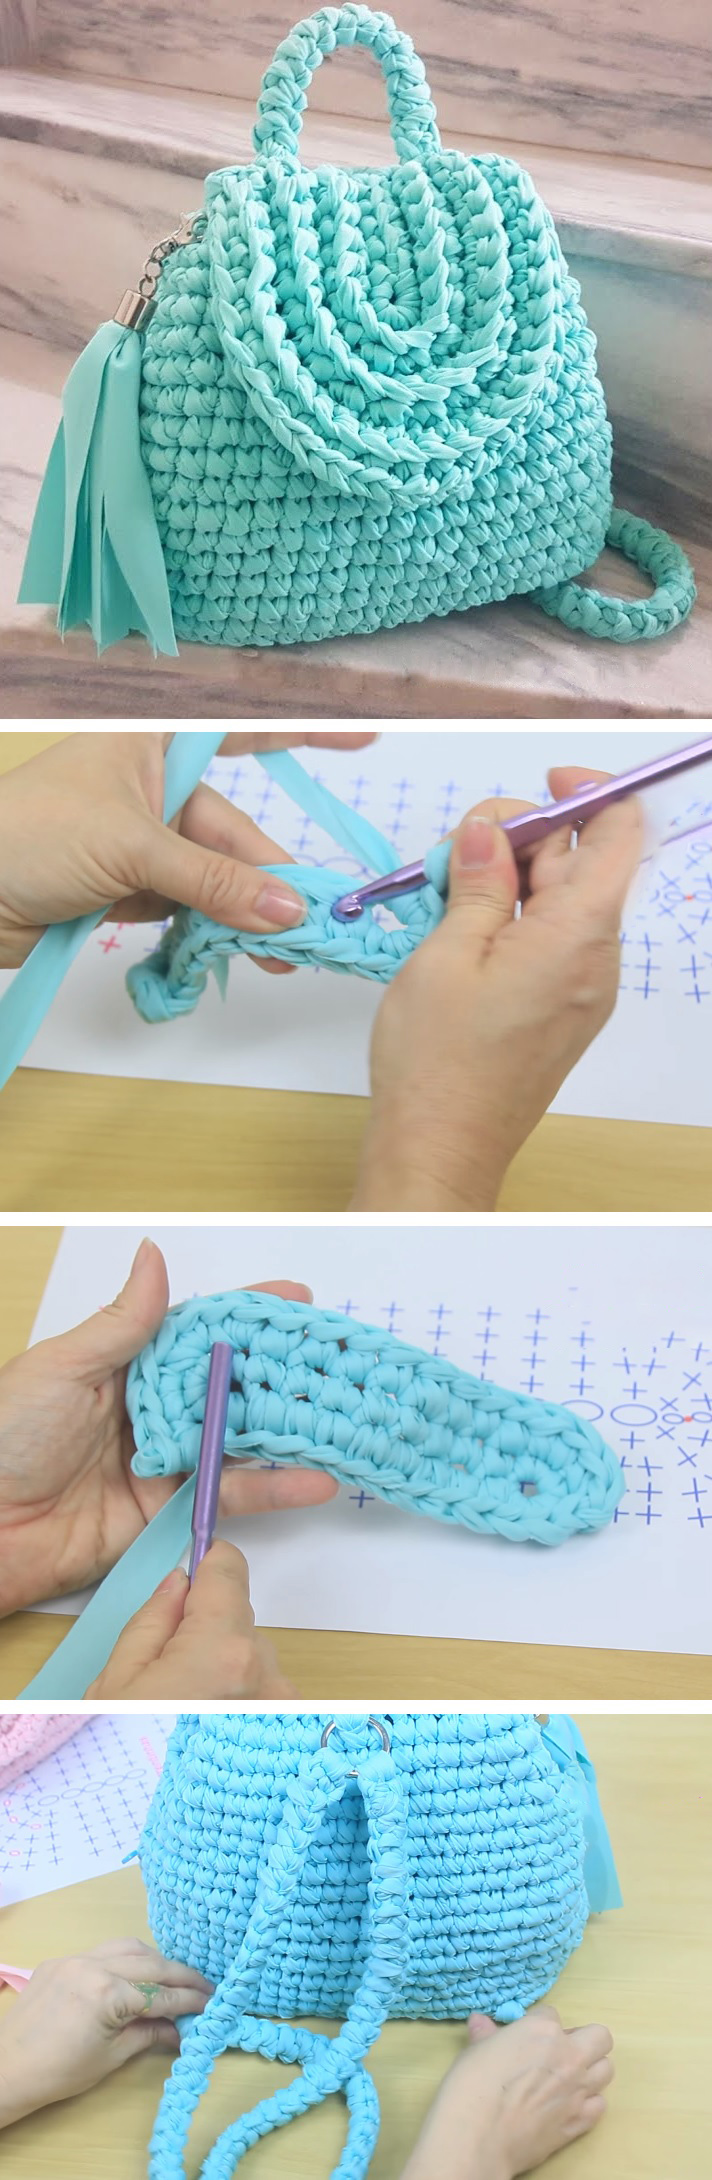 How To Make Crochet Bag Step By Step